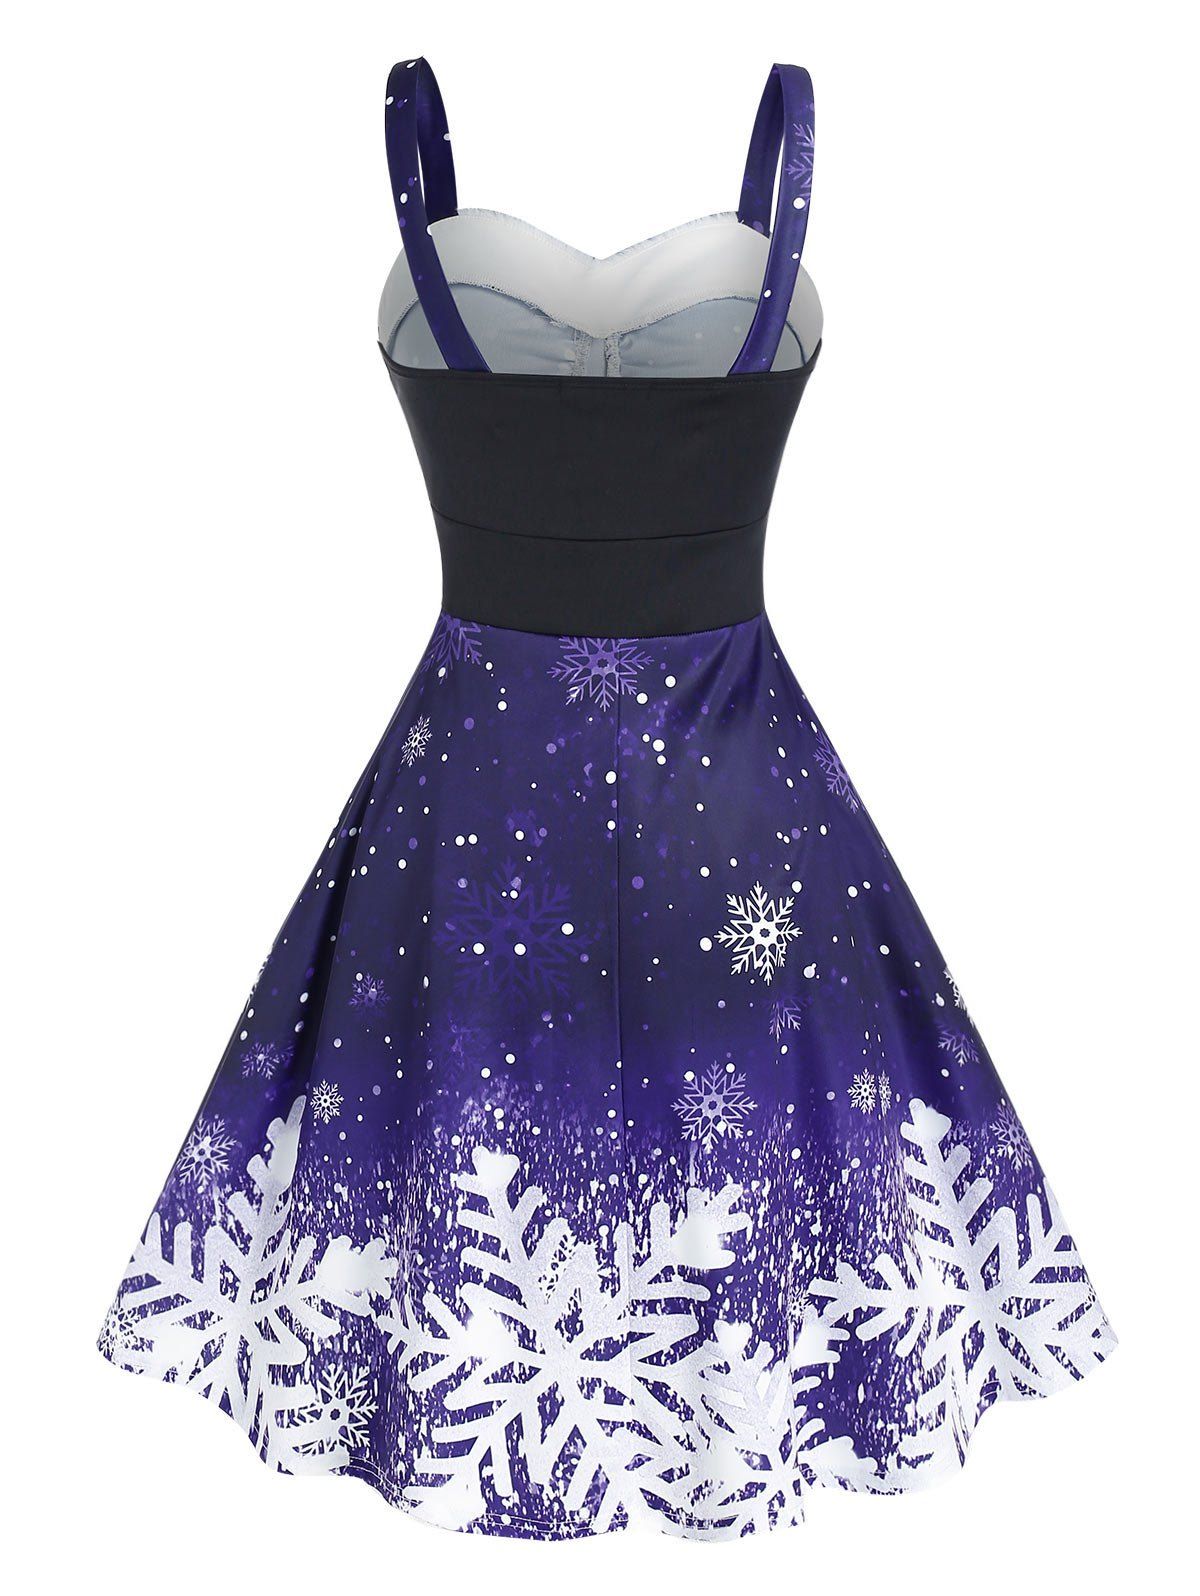 [34% OFF] 2020 Snowflake Print Ombre Color Christmas Dress In DEEP BLUE ...